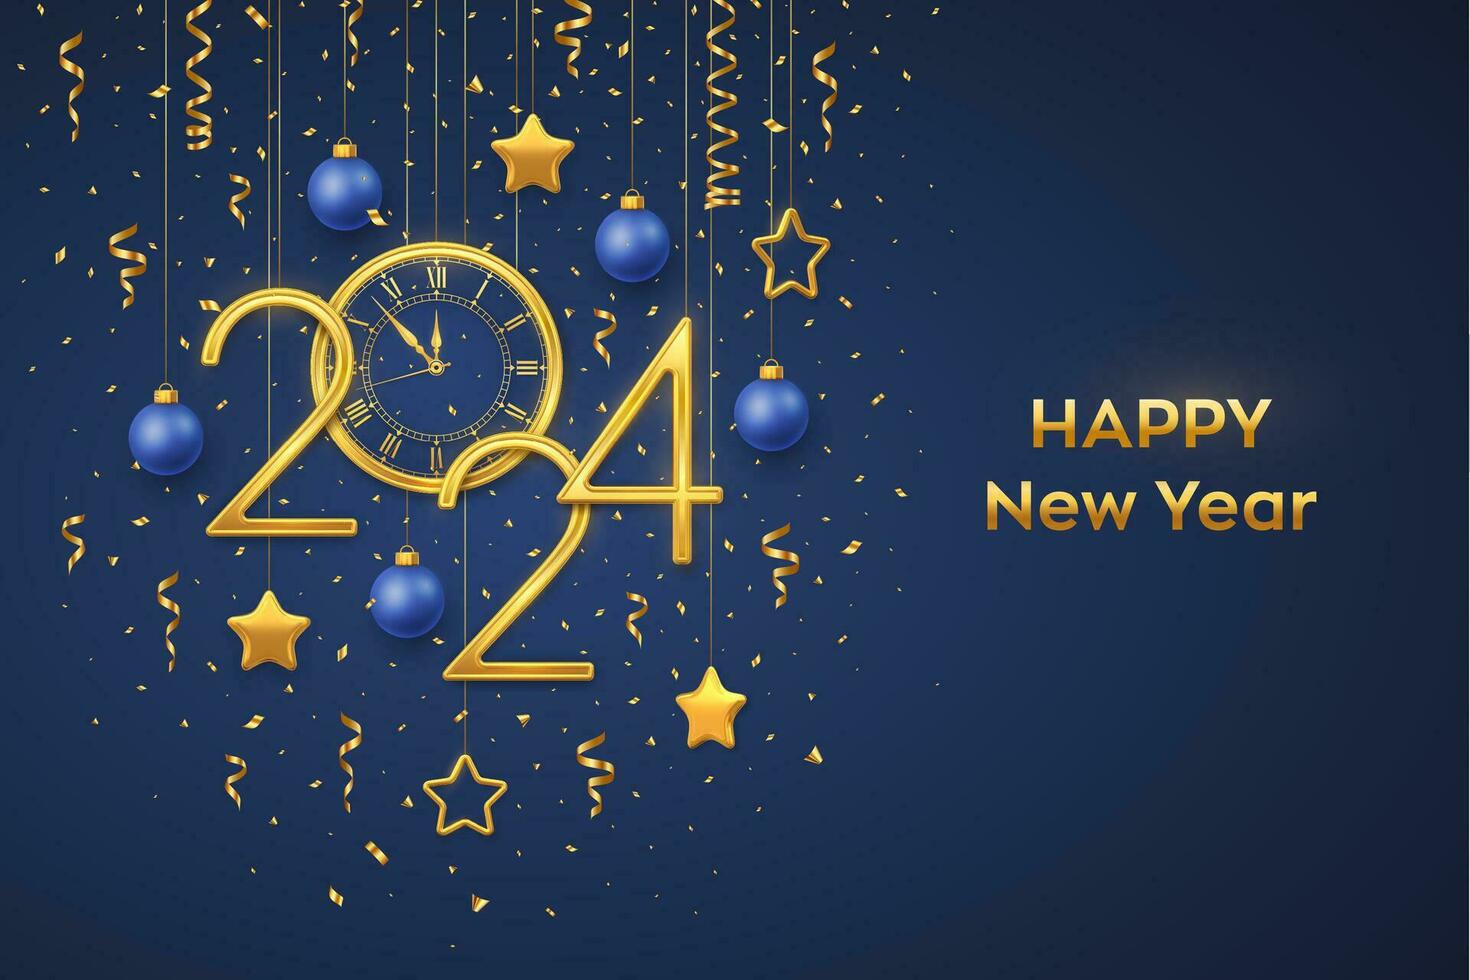 Happy New Year 2024. Gold metallic numbers 2024 and watch with Roman numeral and countdown midnight, eve for New Year. Hanging golden stars and balls on blue background. Realistic vector illustration.